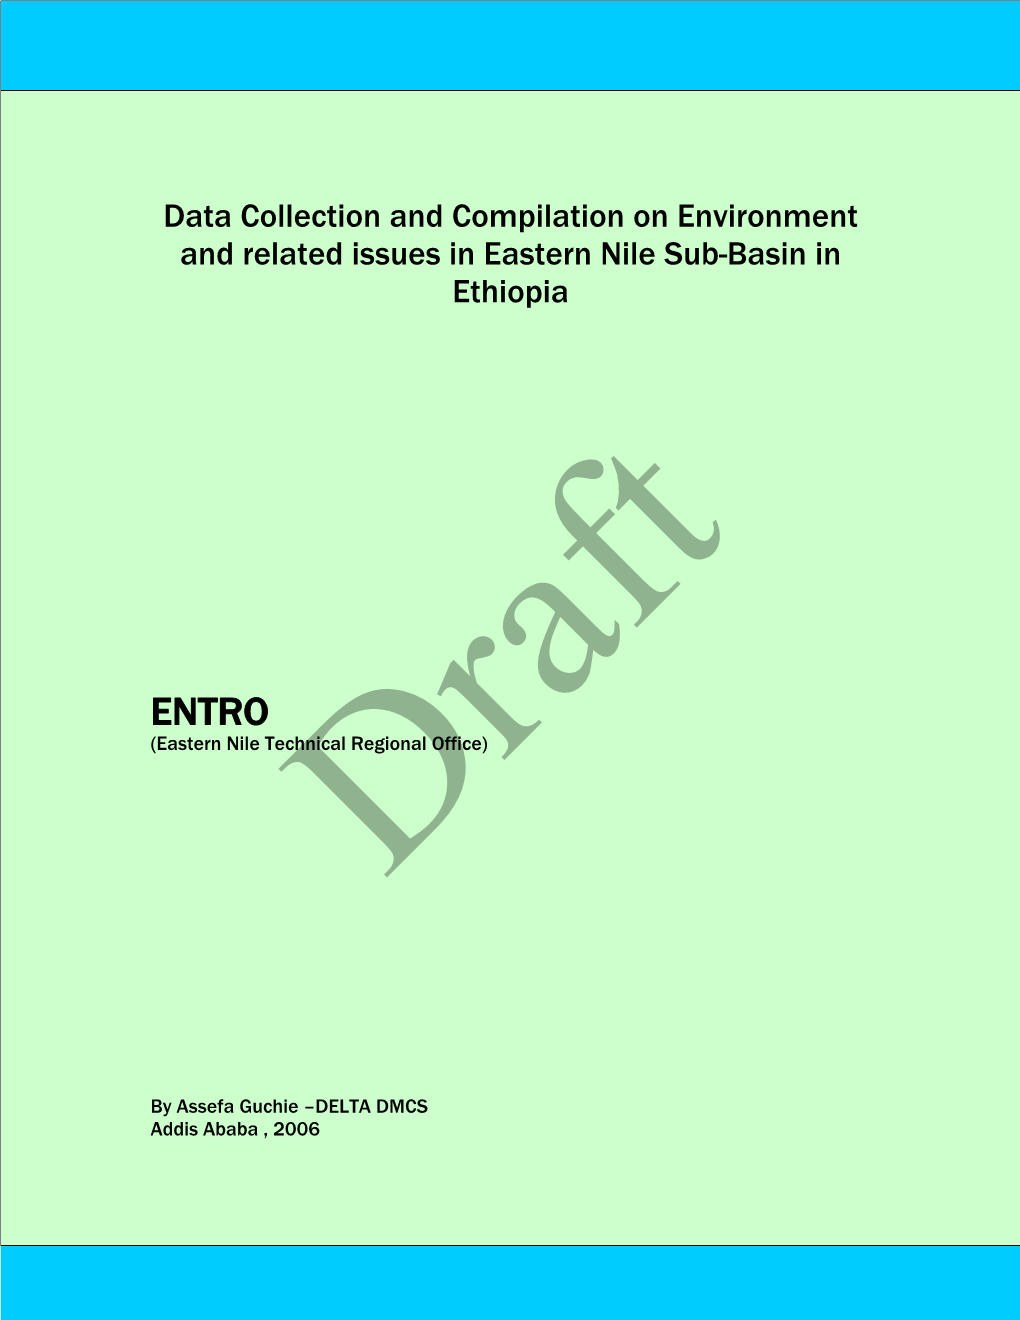 Data Collection and Compilation on Environment and Related Issues in Eastern Nile Sub-Basin in Ethiopia